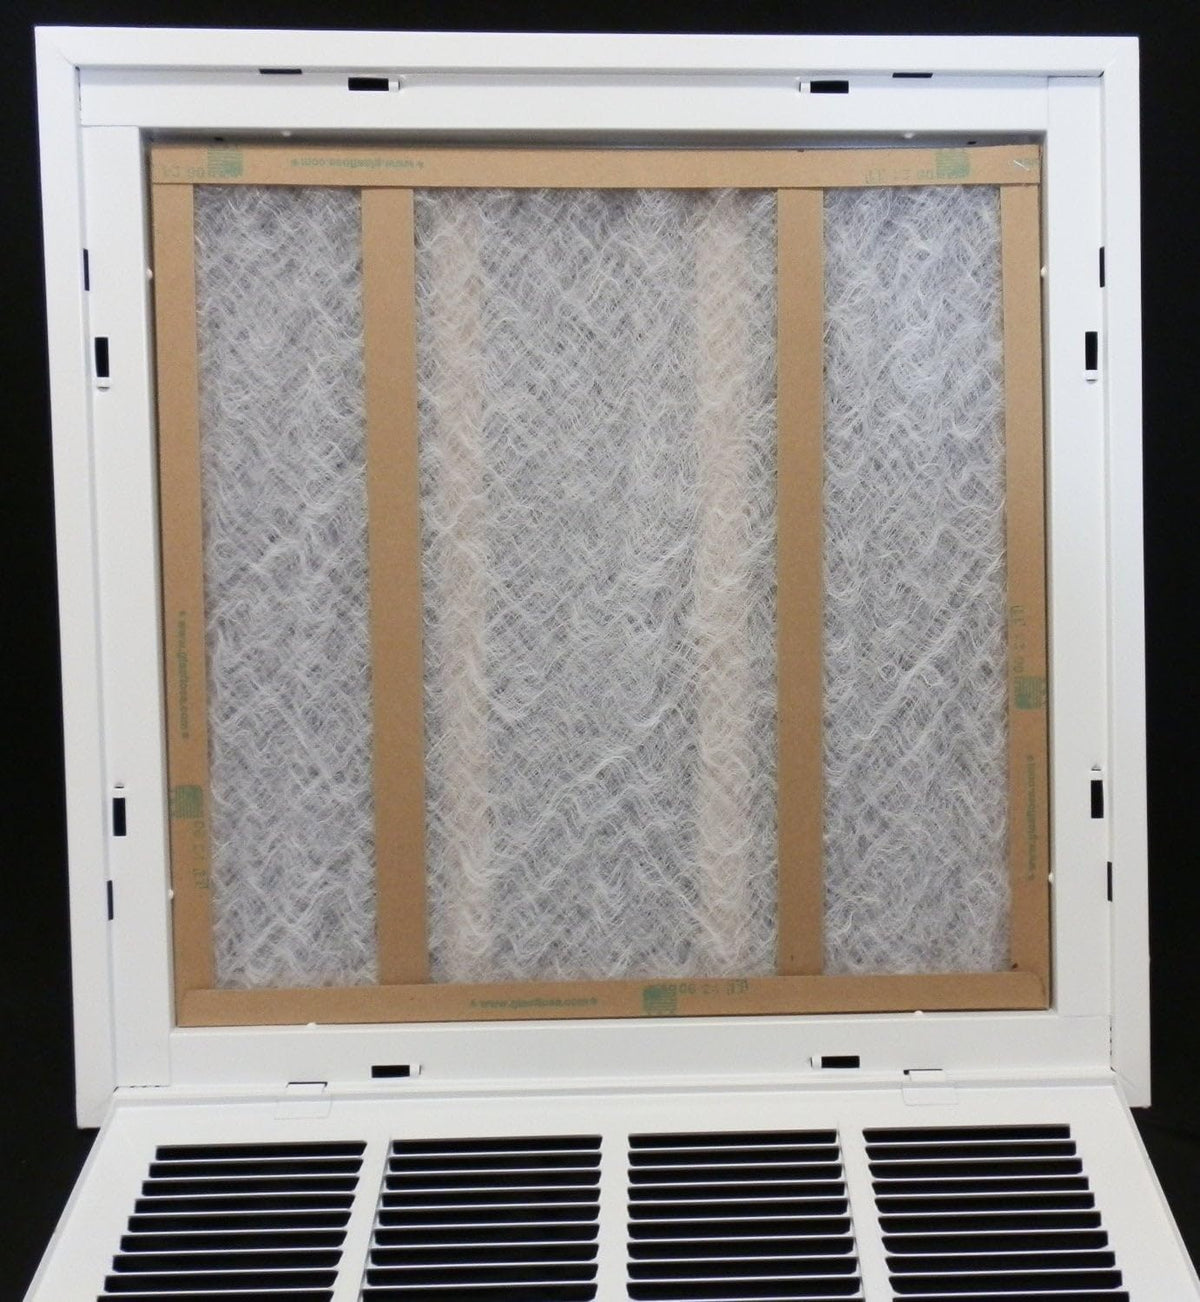 32&quot; X 36&quot; Steel Return Air Filter Grille for 1&quot; Filter - Removable Frame - [Outer Dimensions: 34 5/8&quot; X 38 5/8&quot;]